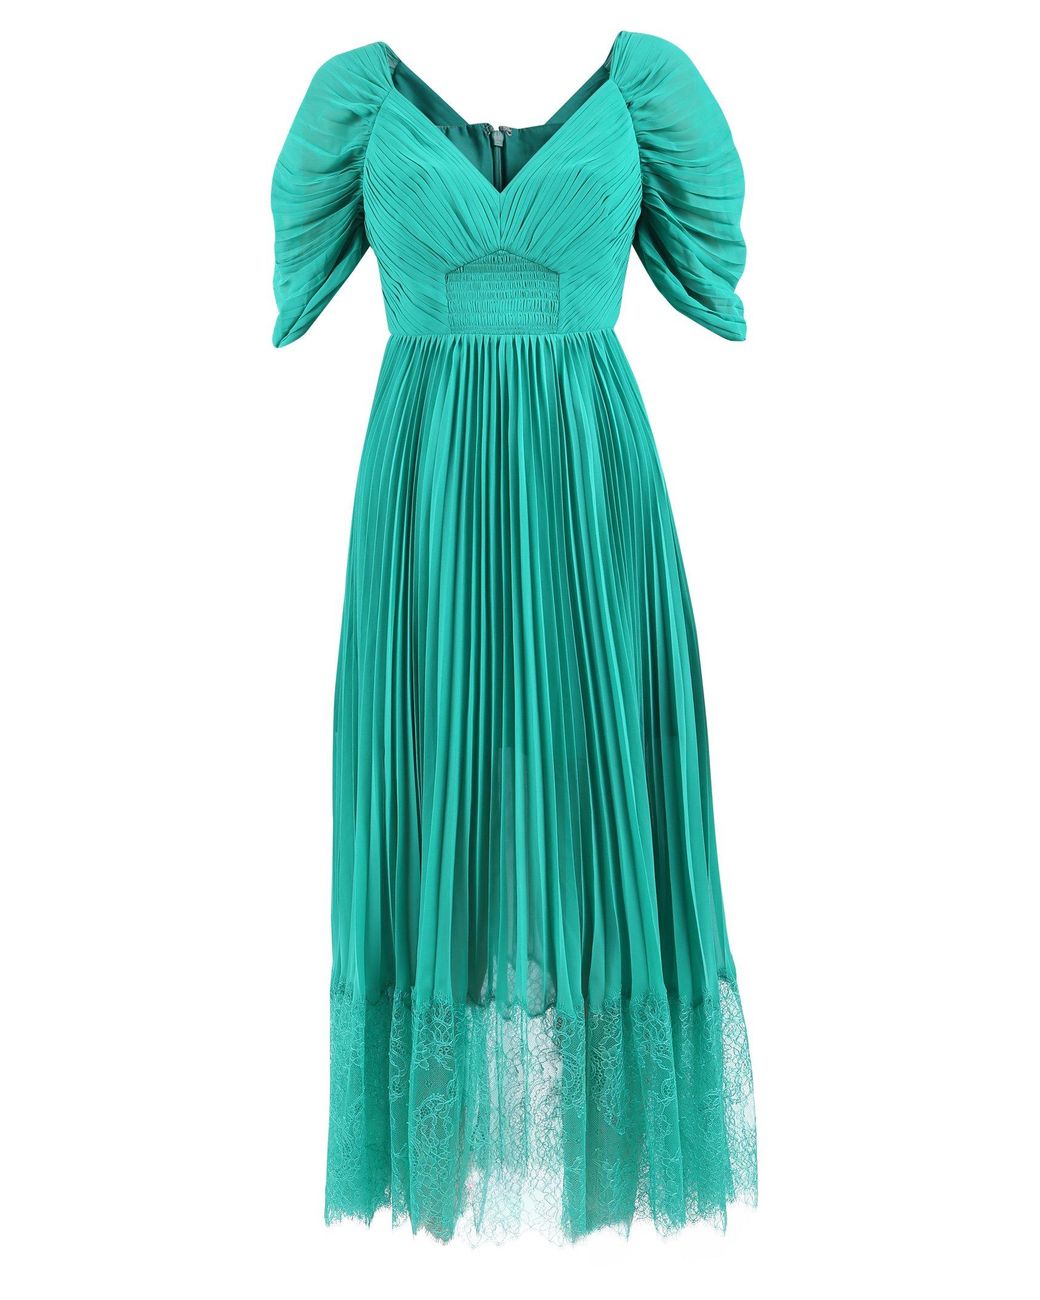 Self-Portrait Synthetic Pleated Lace Trim Midi Dress in Green - Save 8% ...